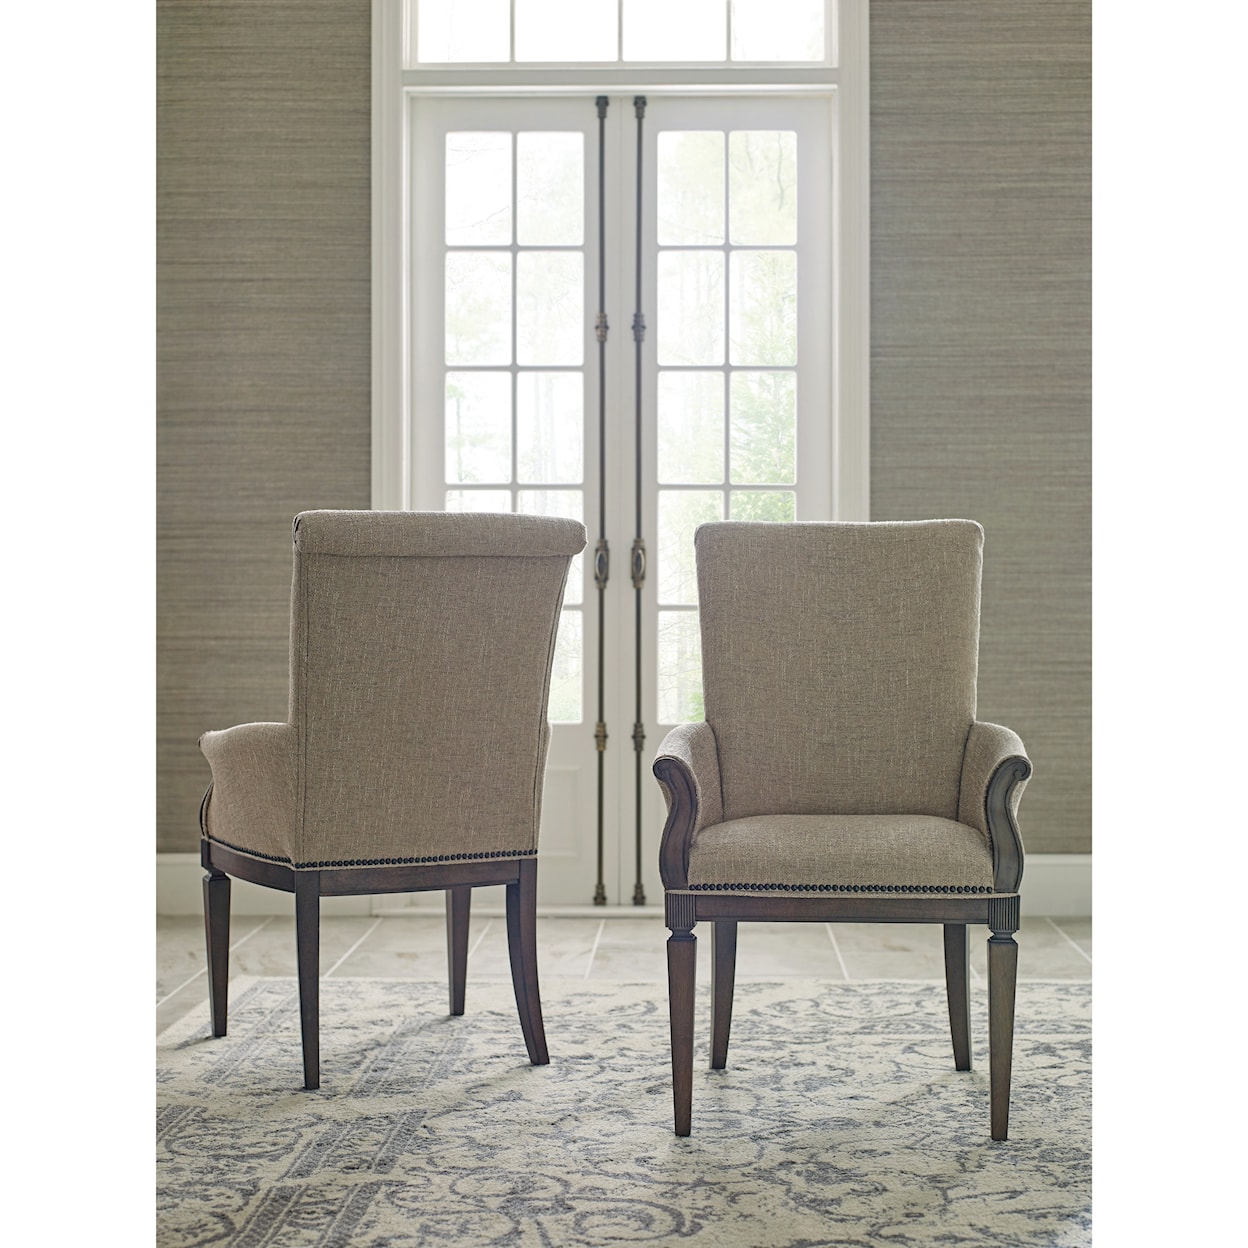 American Drew Savona Camille Upholstered Arm Chair